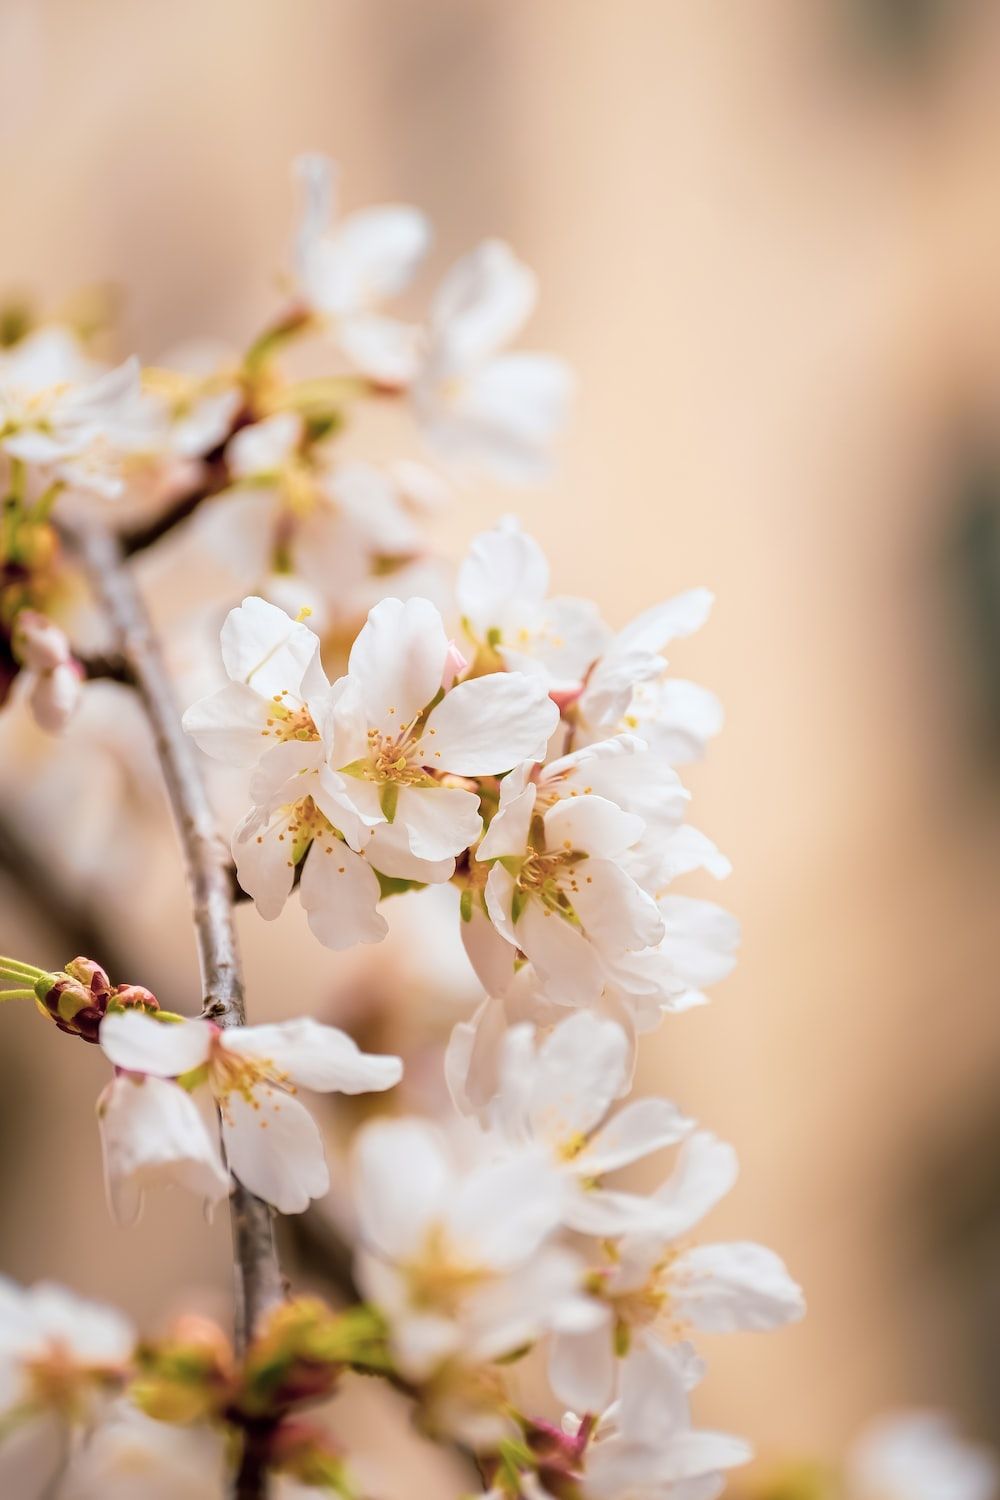 Close up of white flowers on a tree branch. - Spring